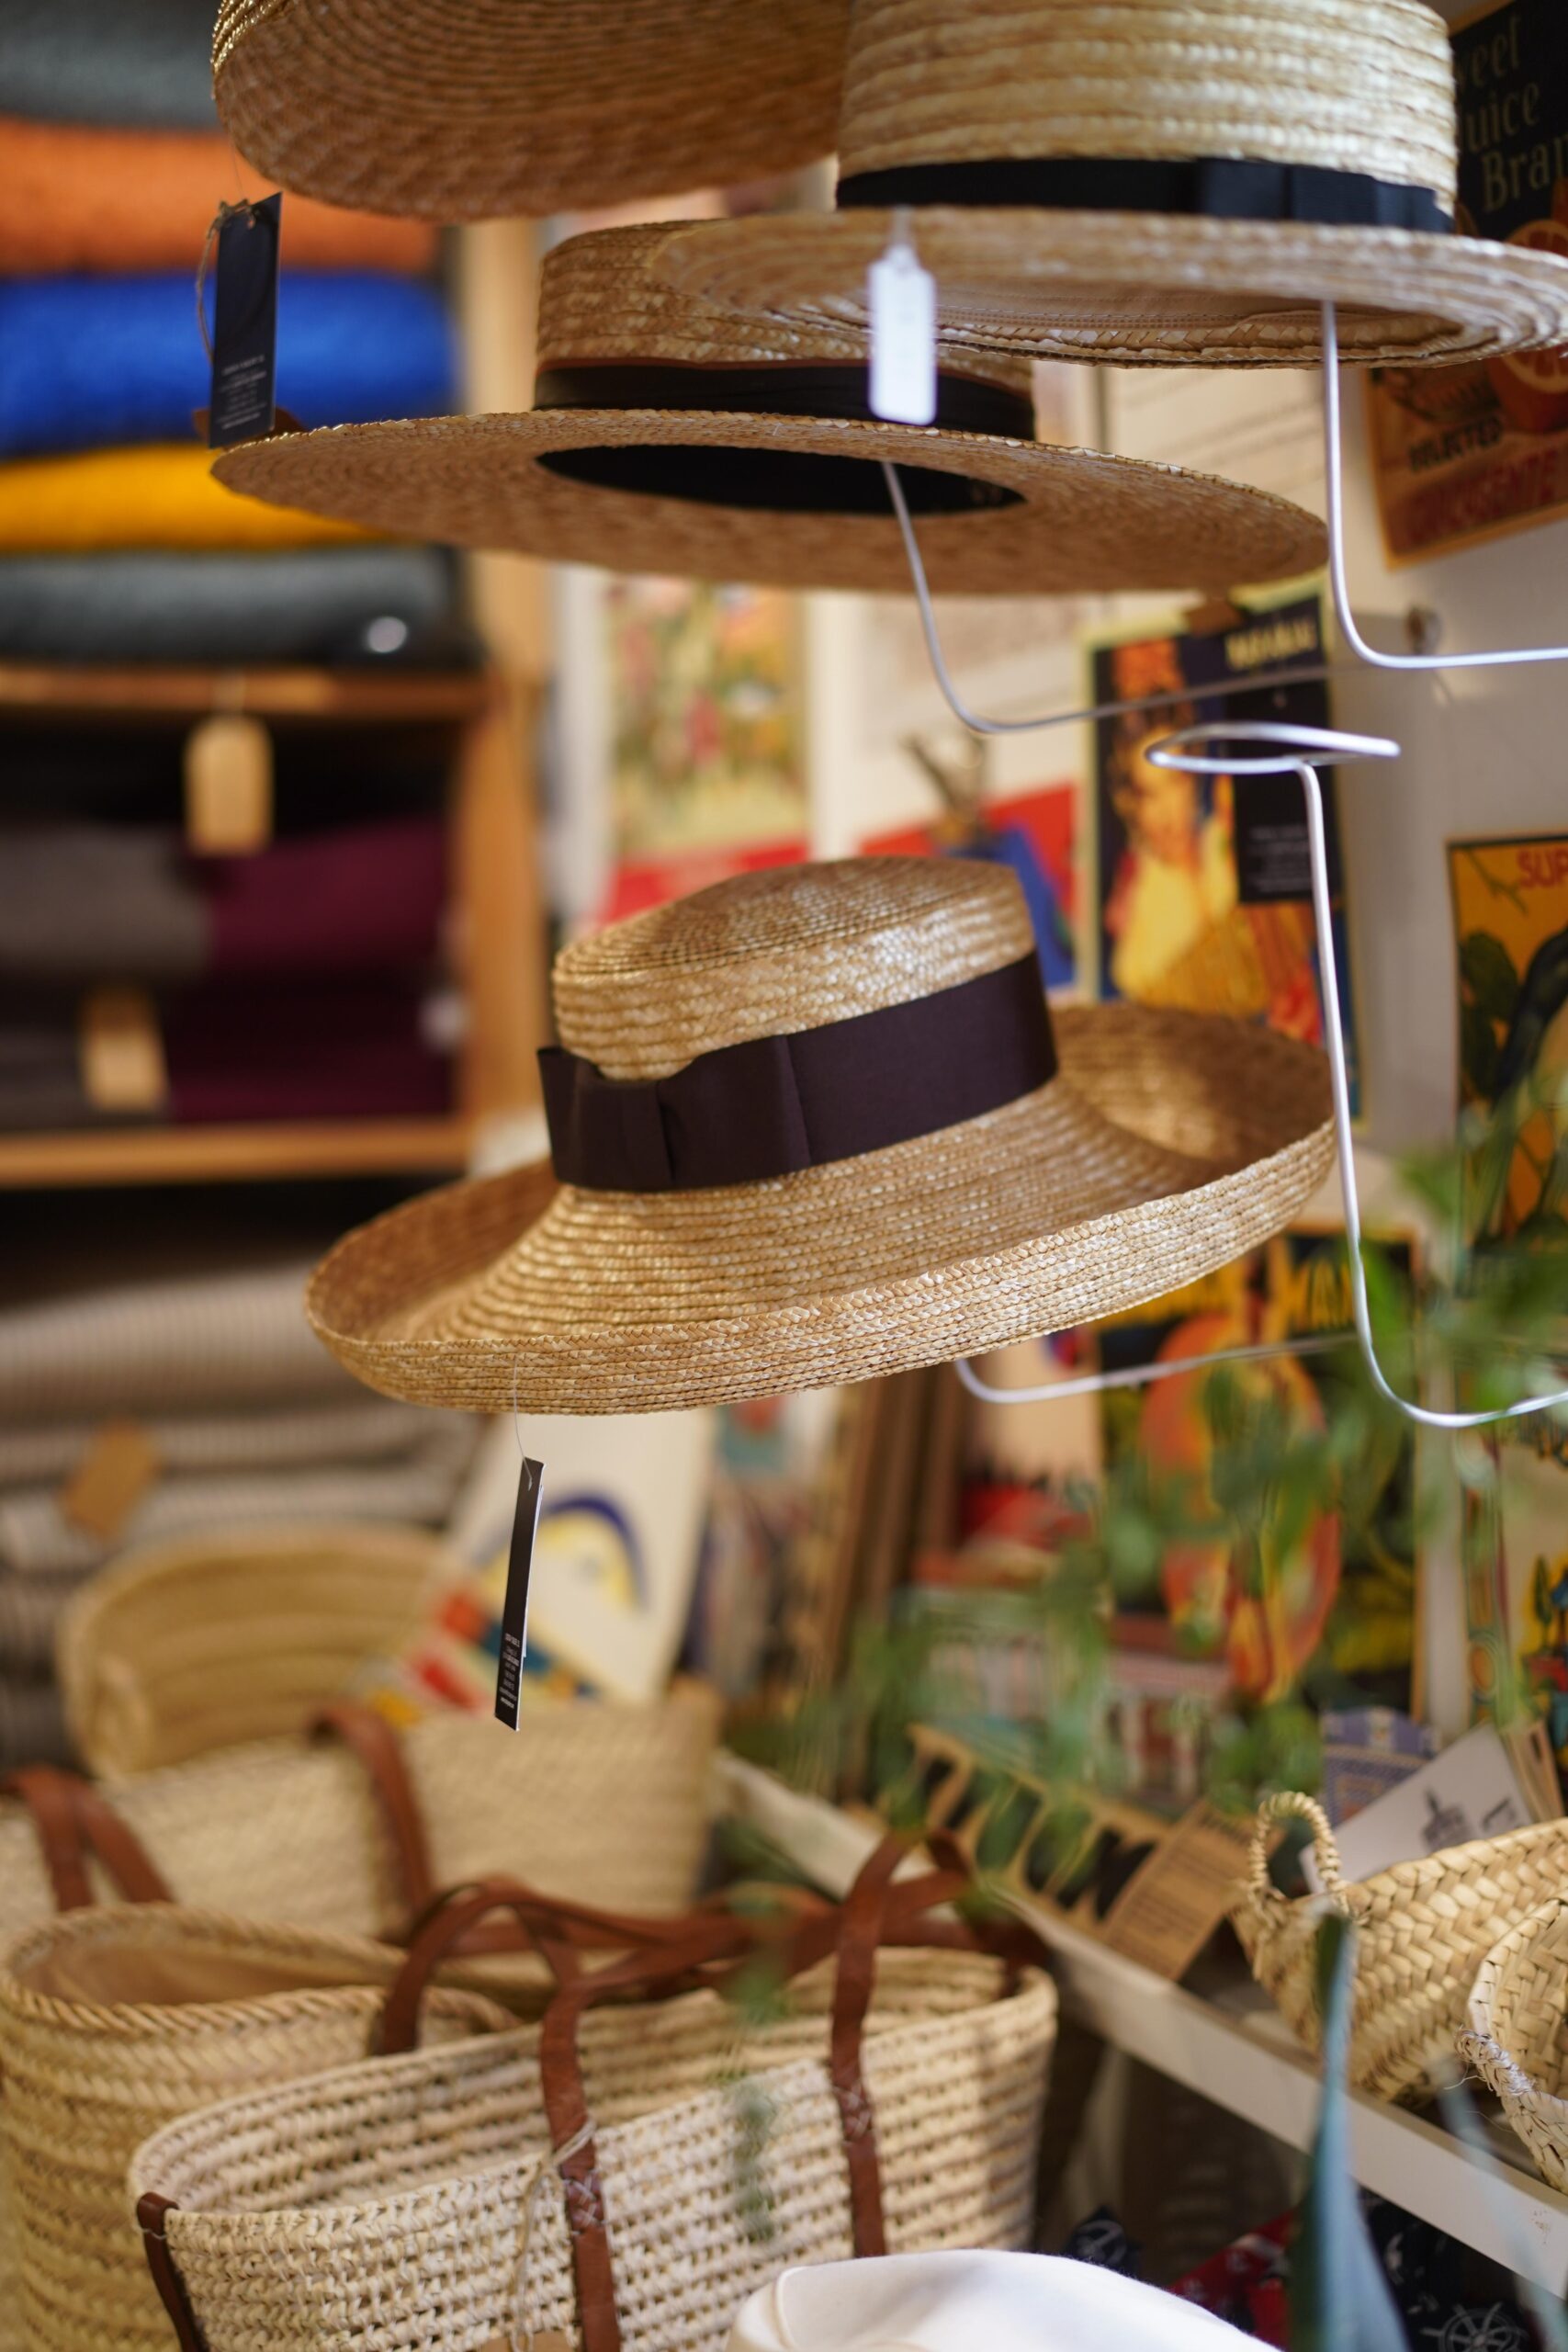 SIMPLE TIENDA: The local ‘Made in Spain’ store advocating the authenticity and durability of storytelling objects